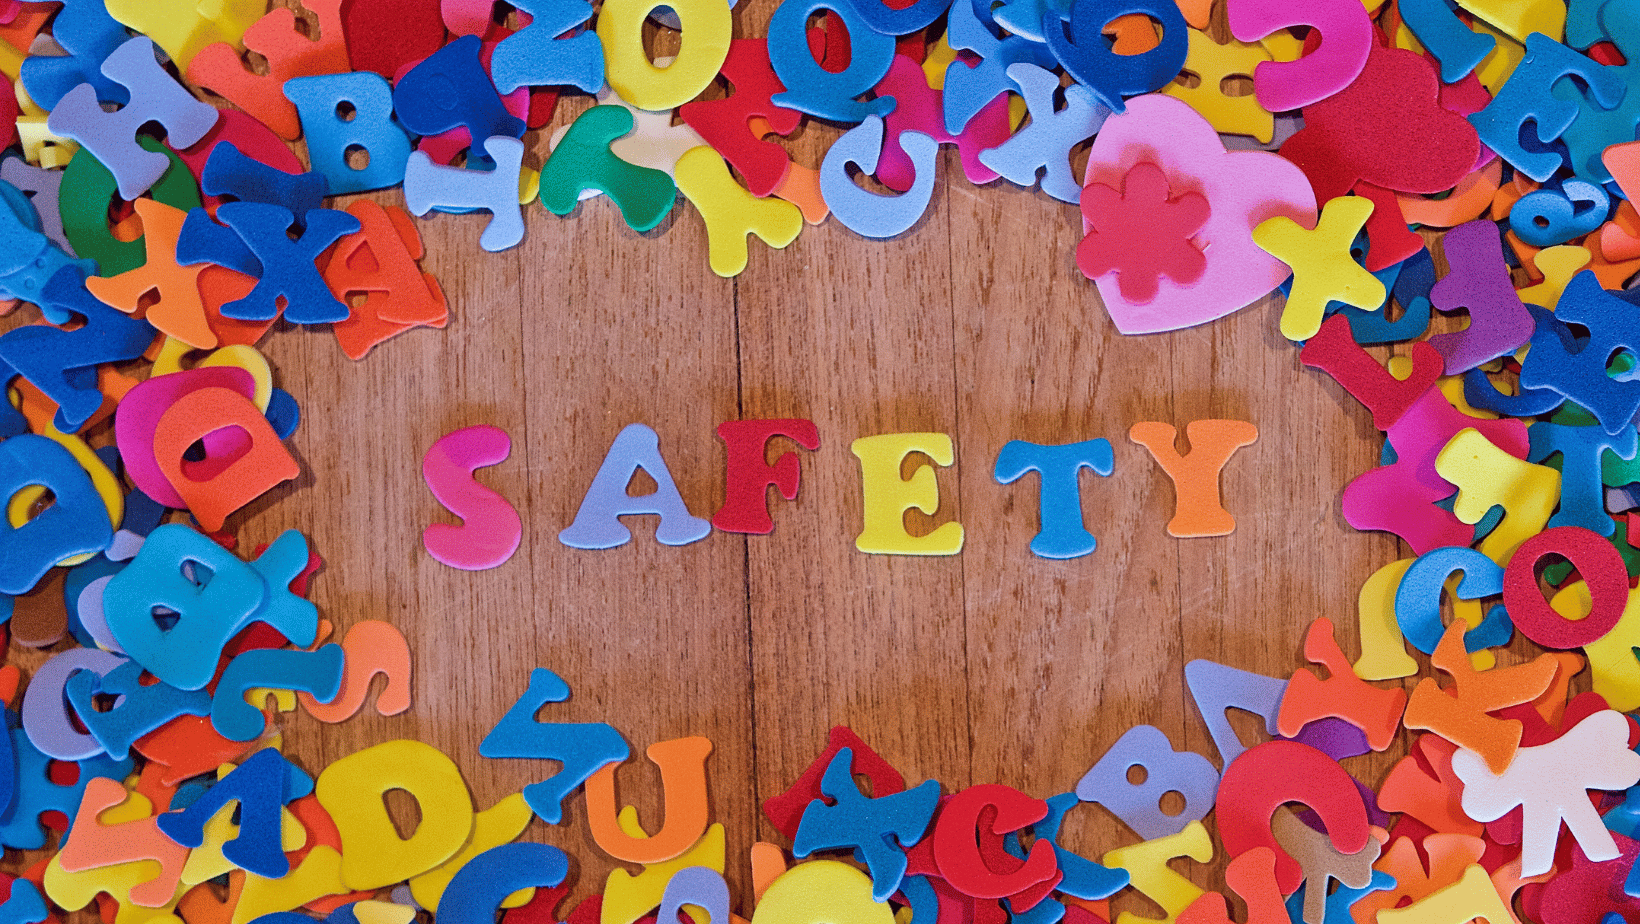 Letters spell our “Safety“ | My Organic Company